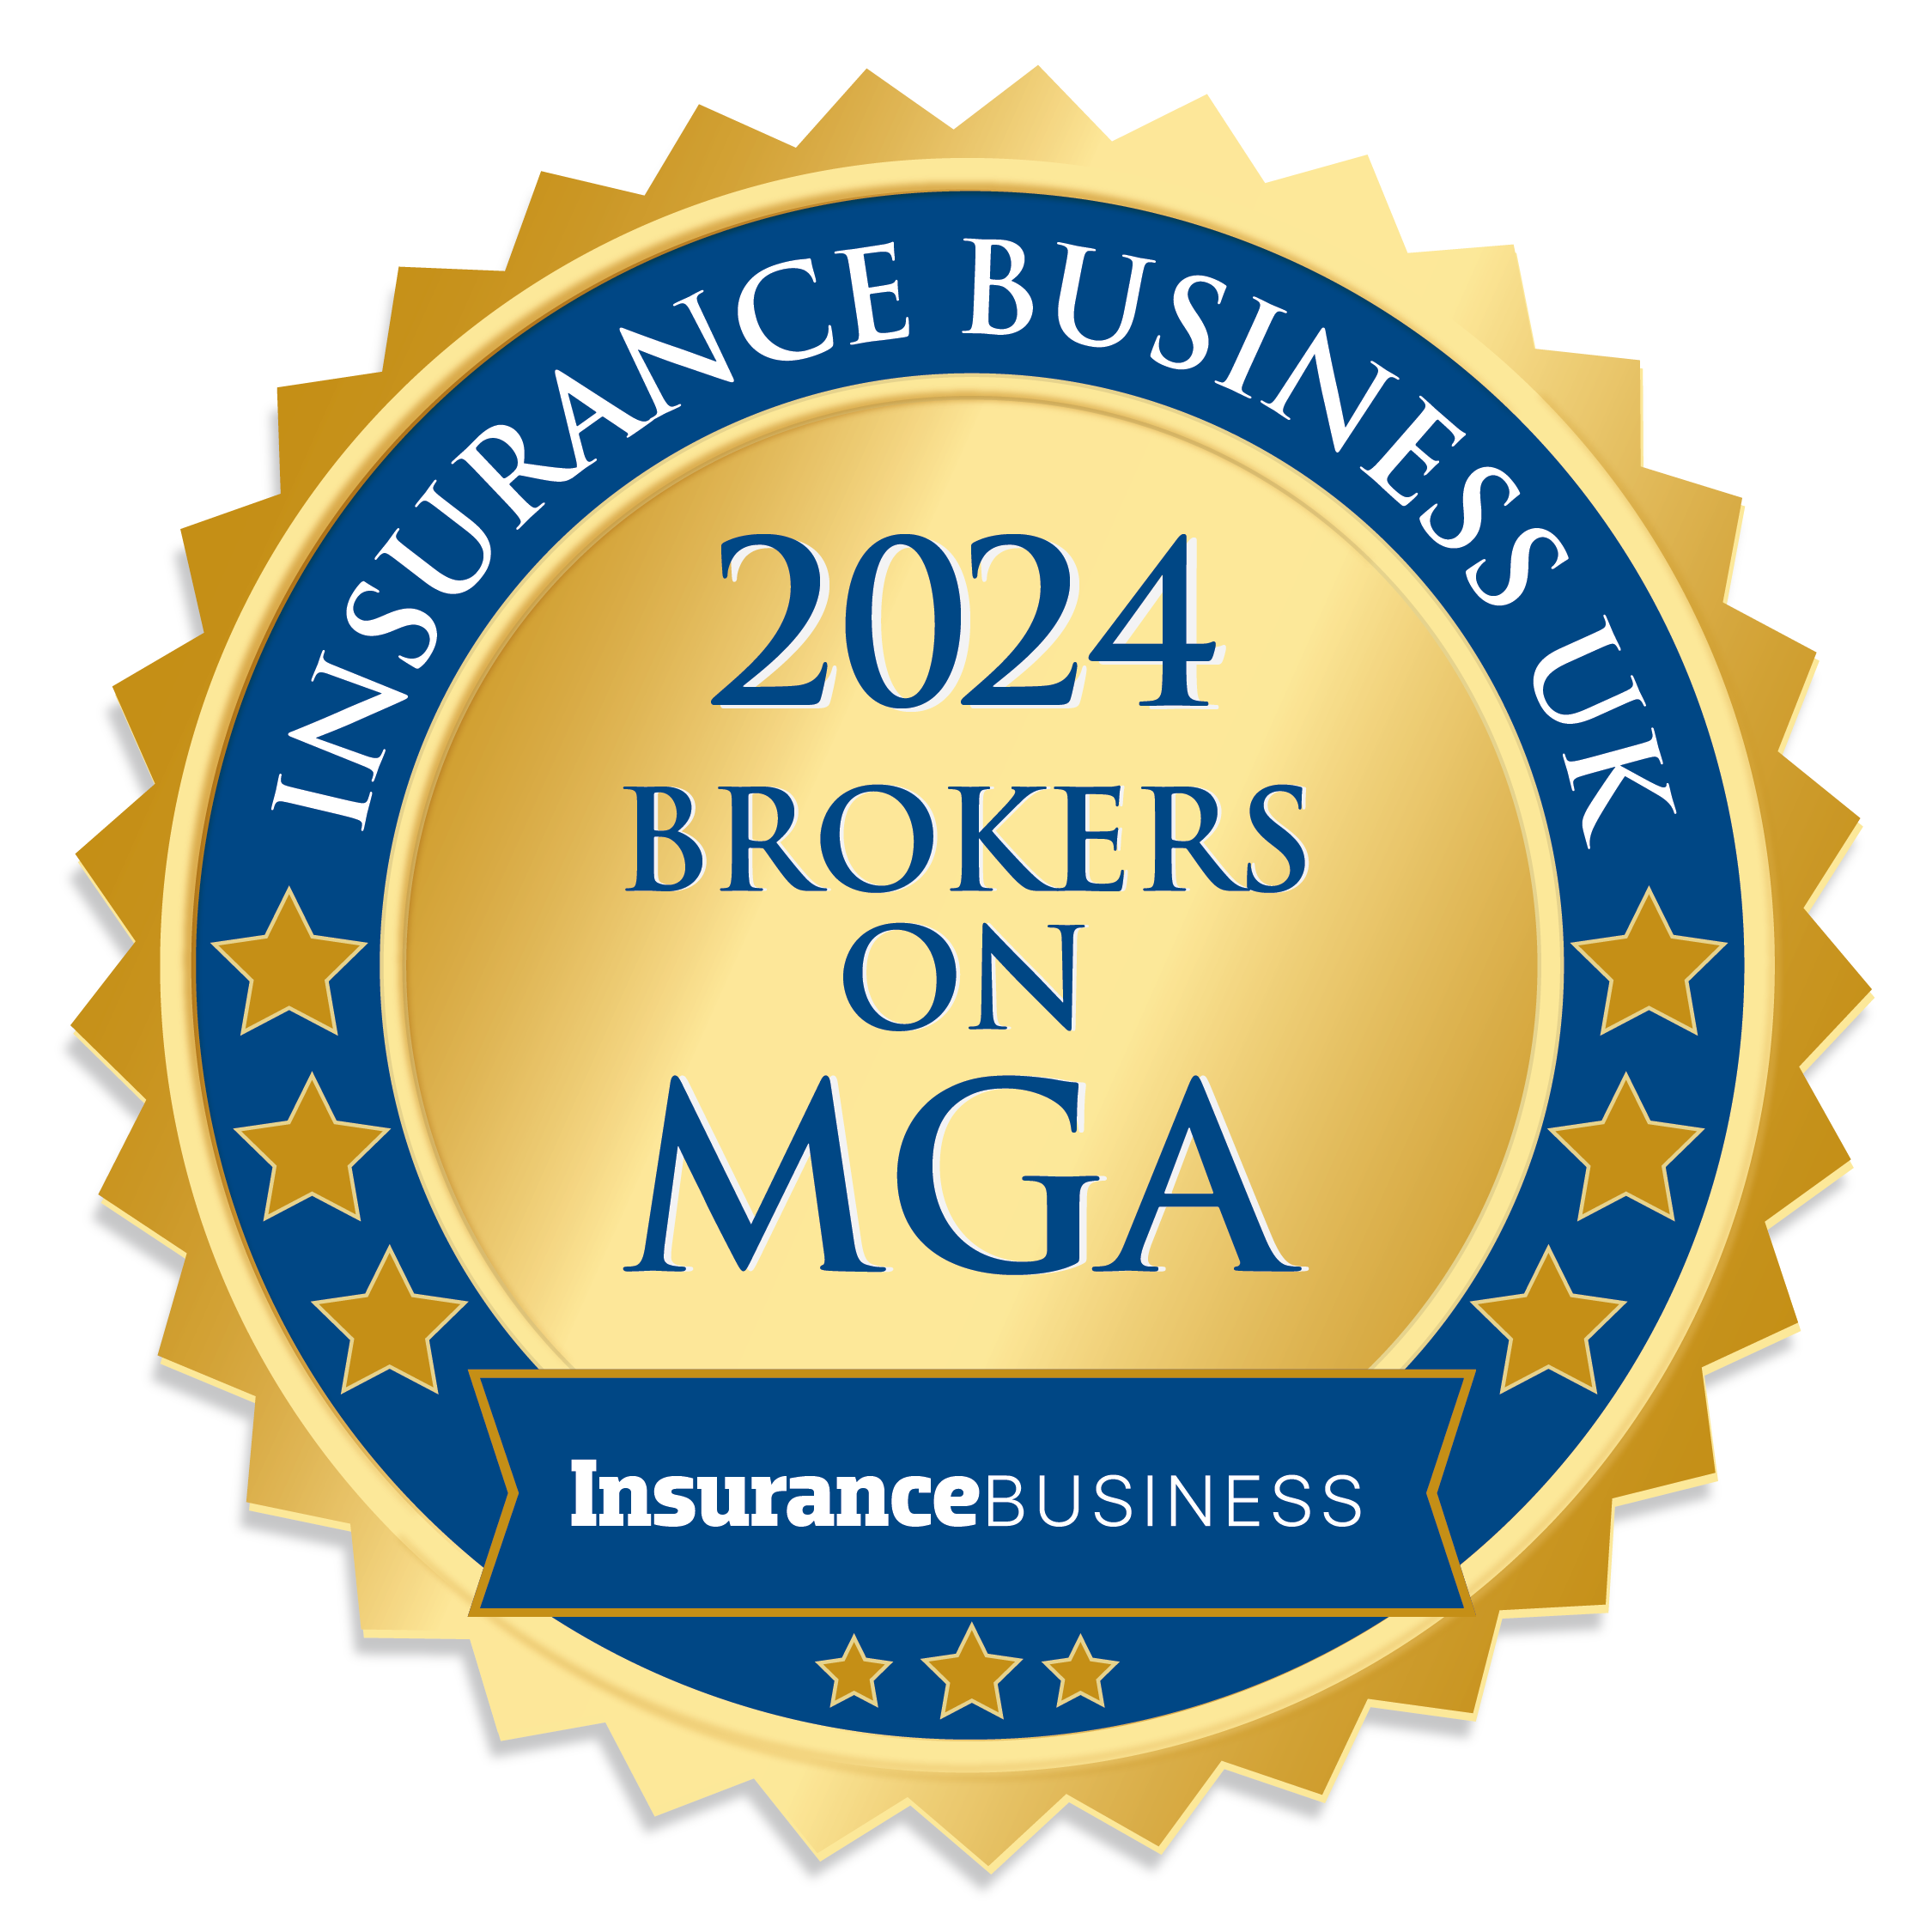 The Best MGA in Insurance in the UK | Brokers on MGAs